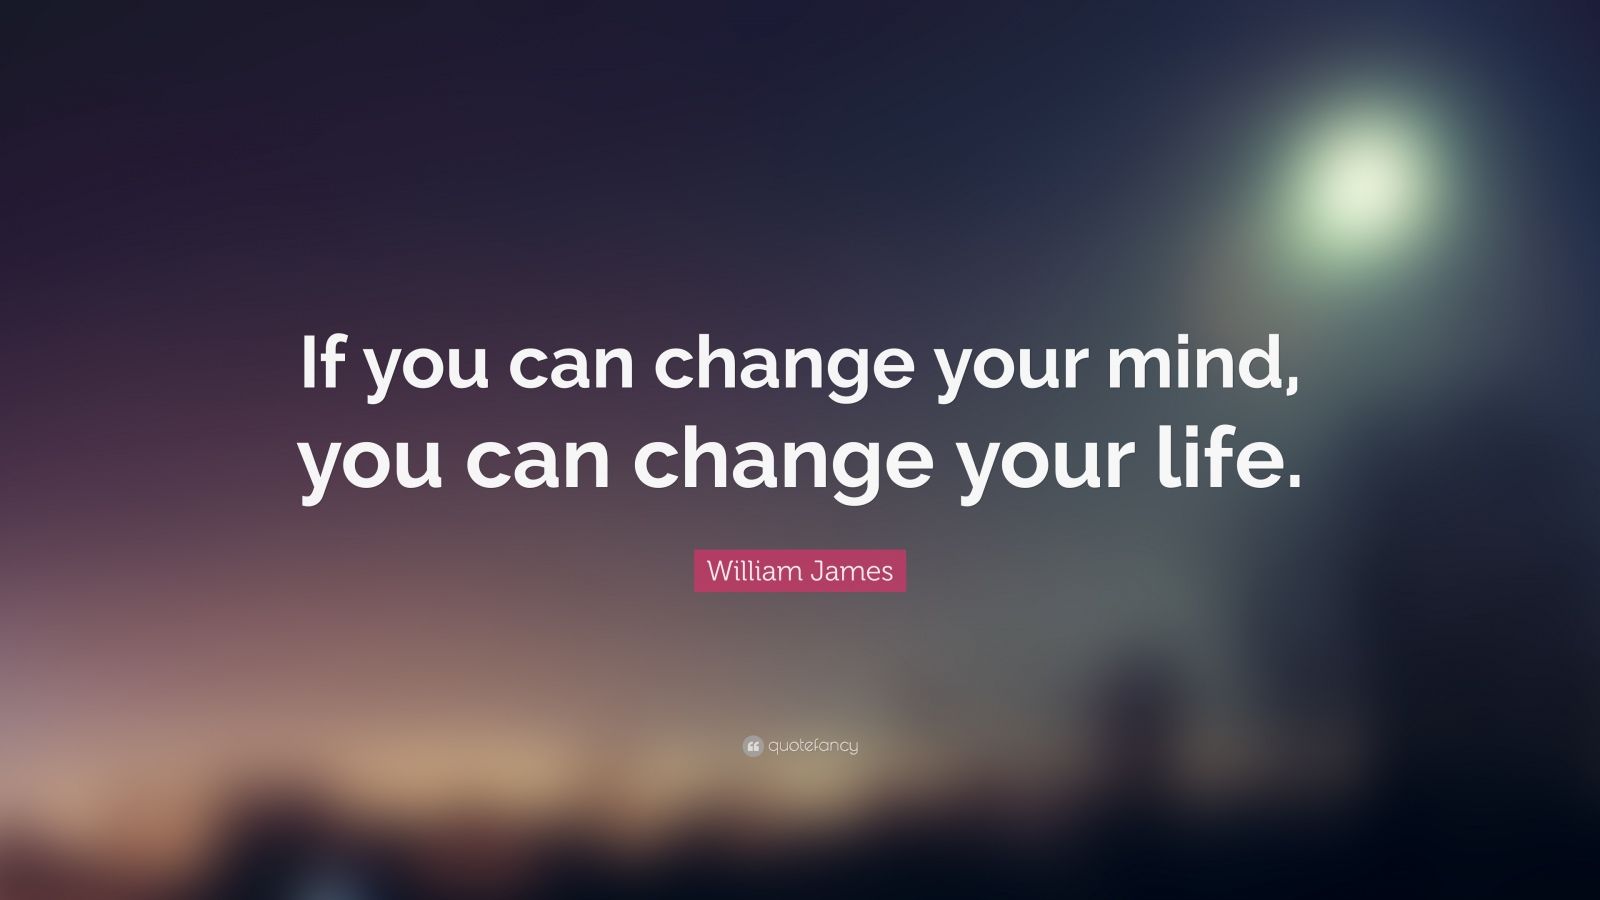 William James Quote: “If you can change your mind, you can change your